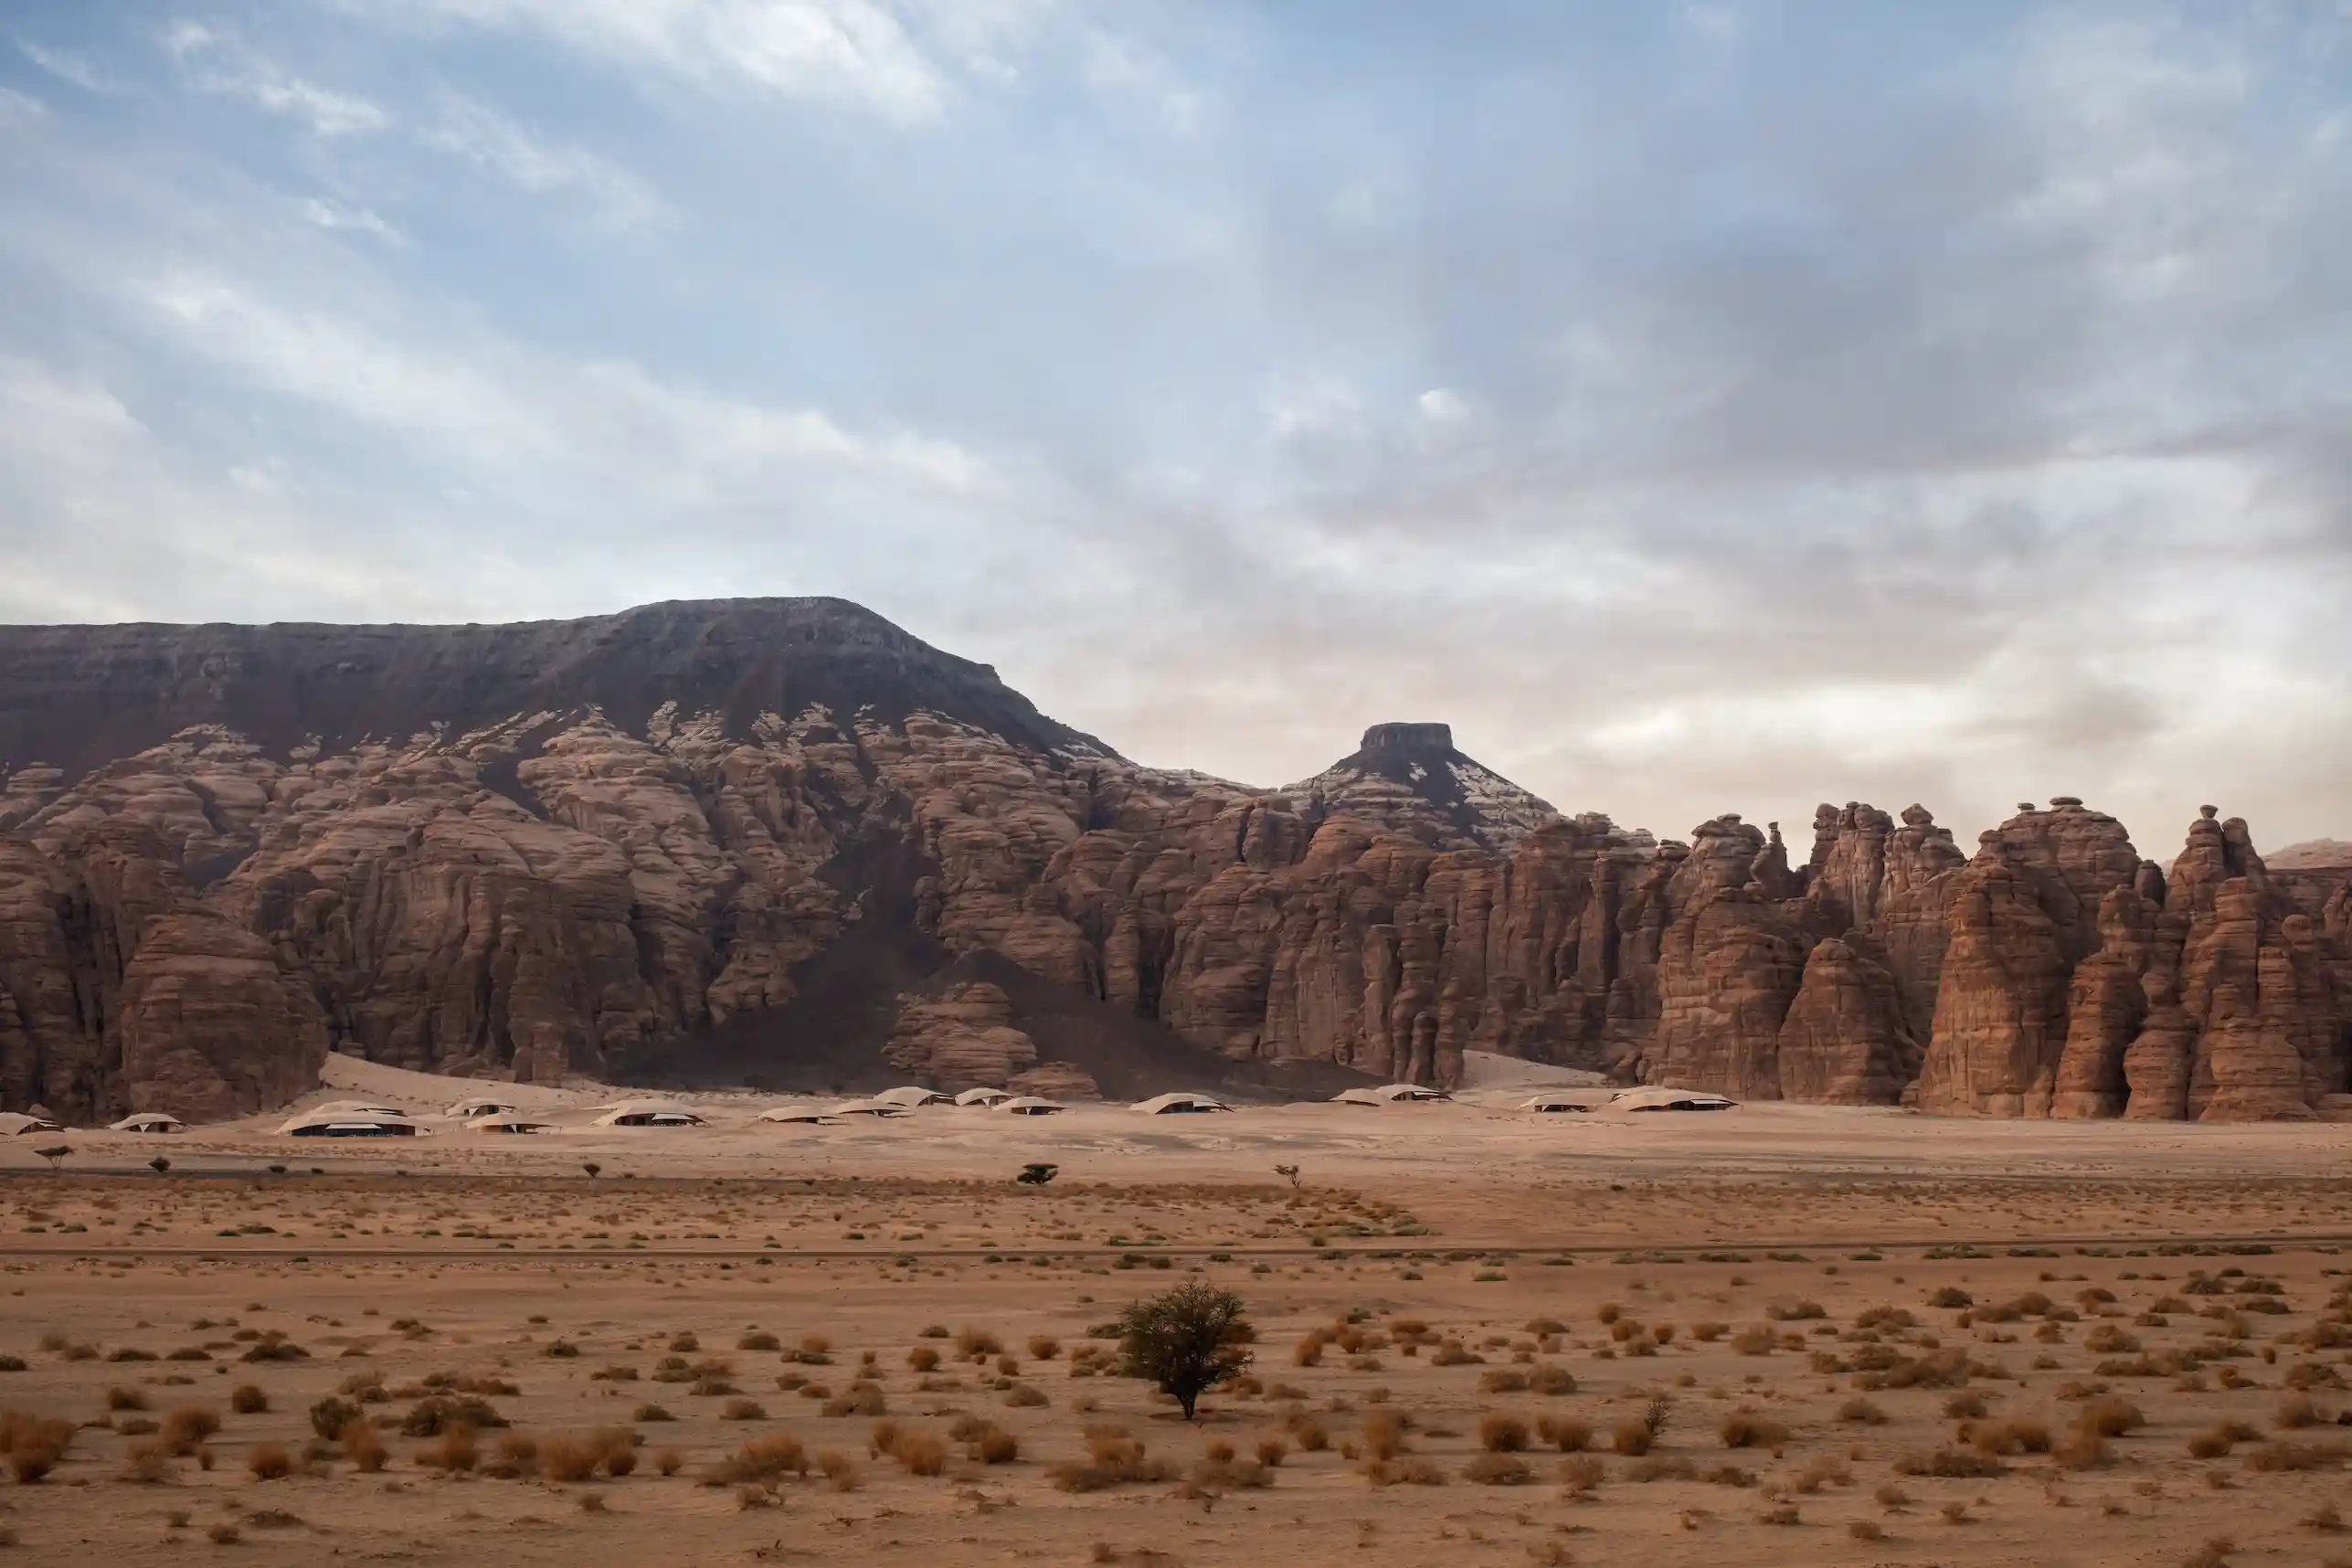 How to Get to AlUla: Nearby Airports